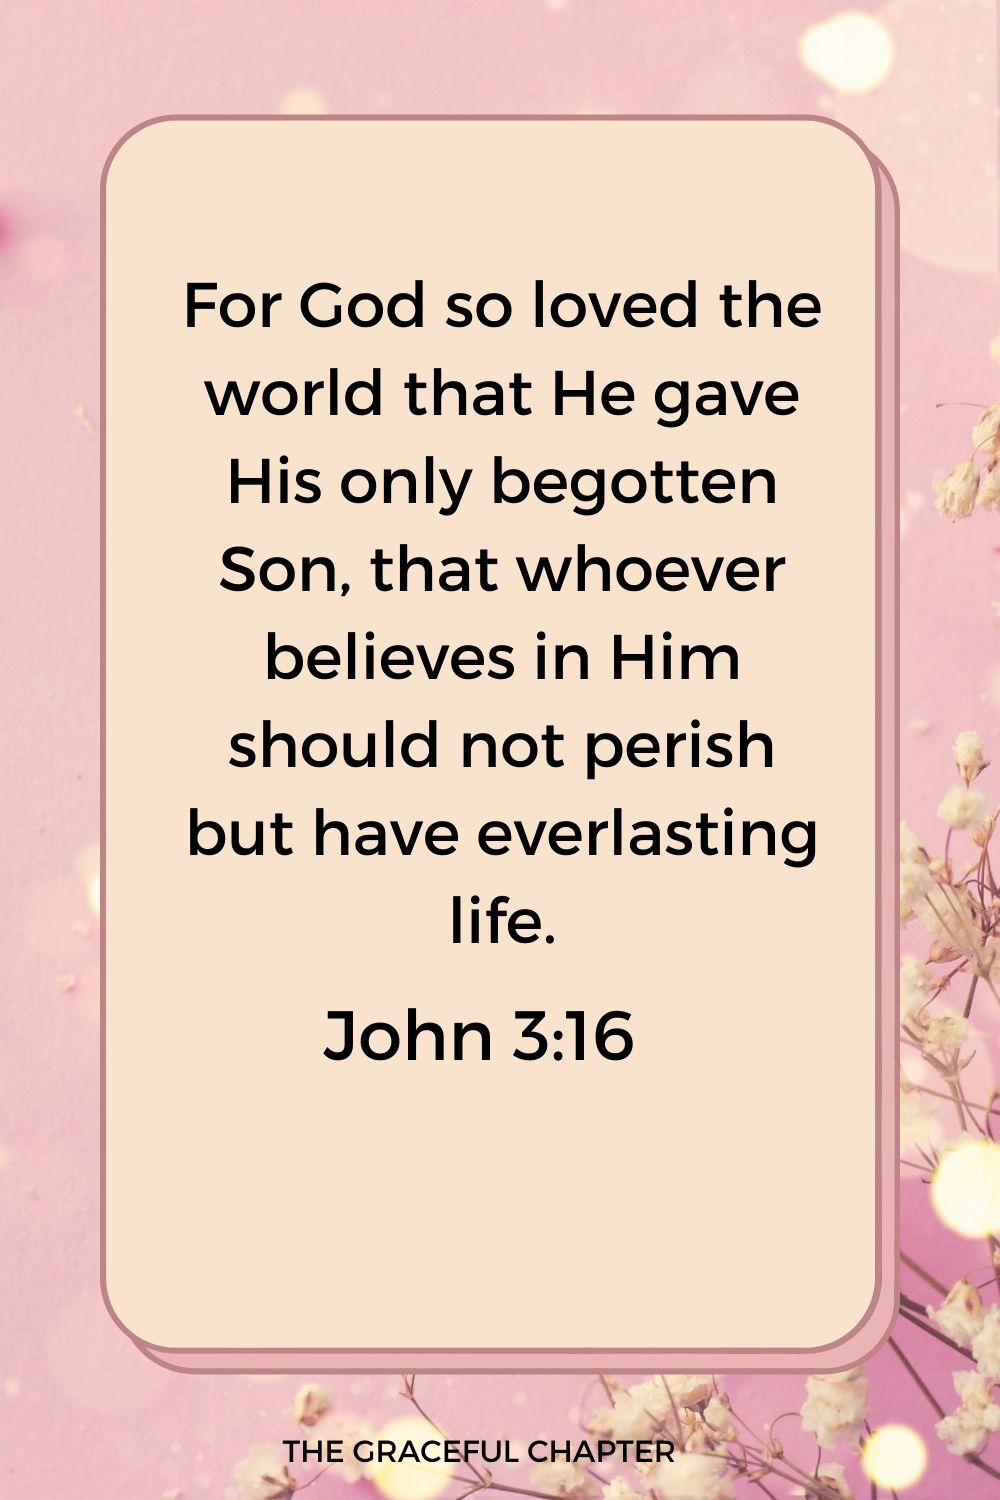 For God so loved the world that He gave His only begotten Son, that whoever believes in Him should not perish but have everlasting life. John 3:16